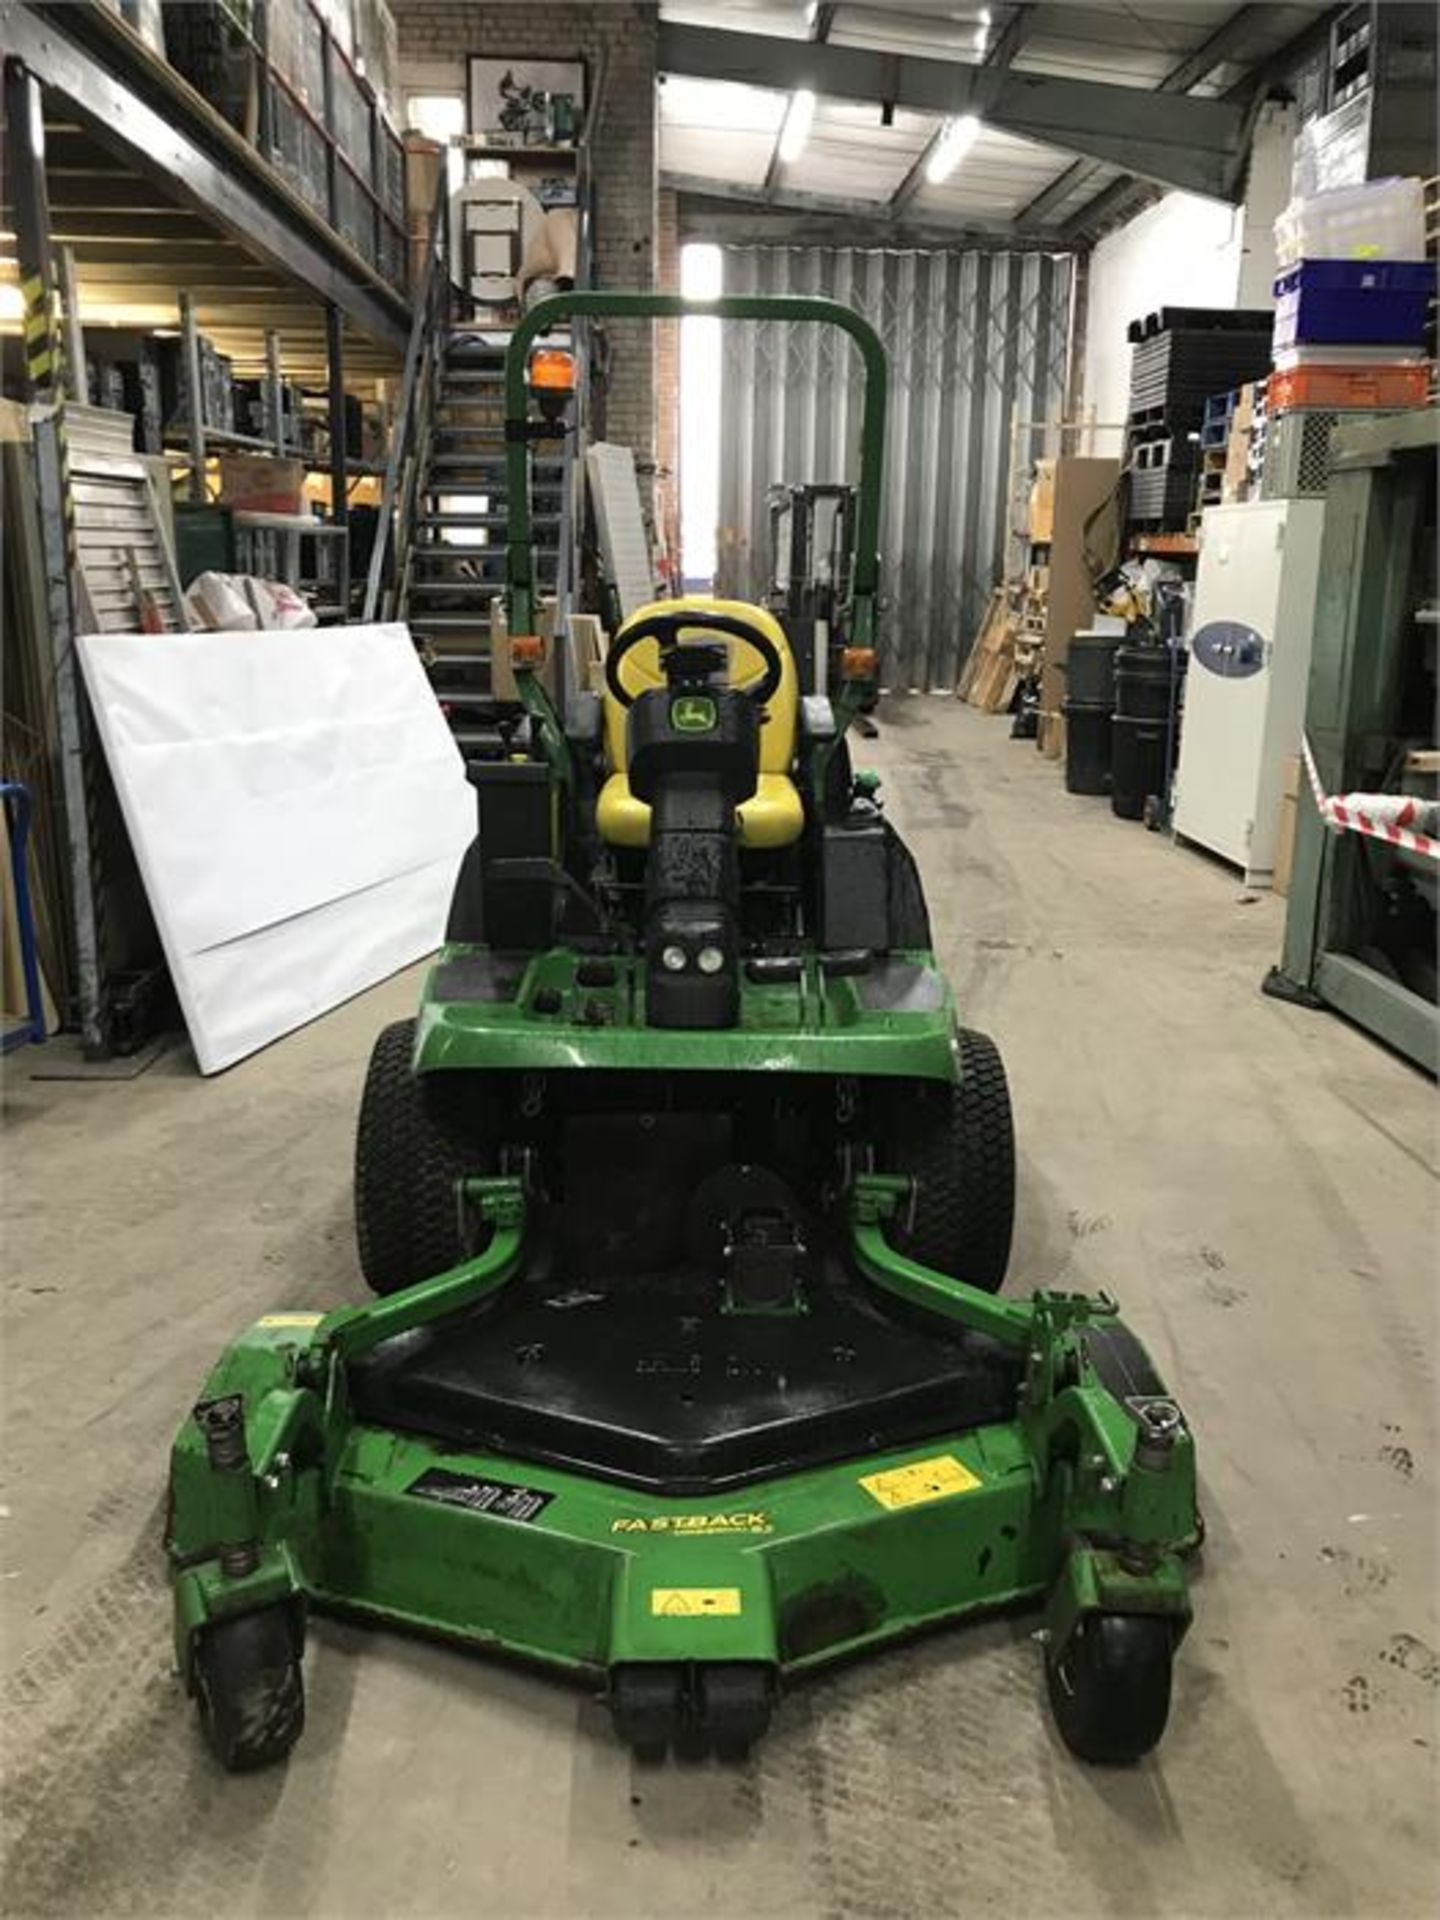 John Deere 1570 TER C 4WD Front Rotary Mower with Fastback Commercial 62 Attachment - Image 2 of 6